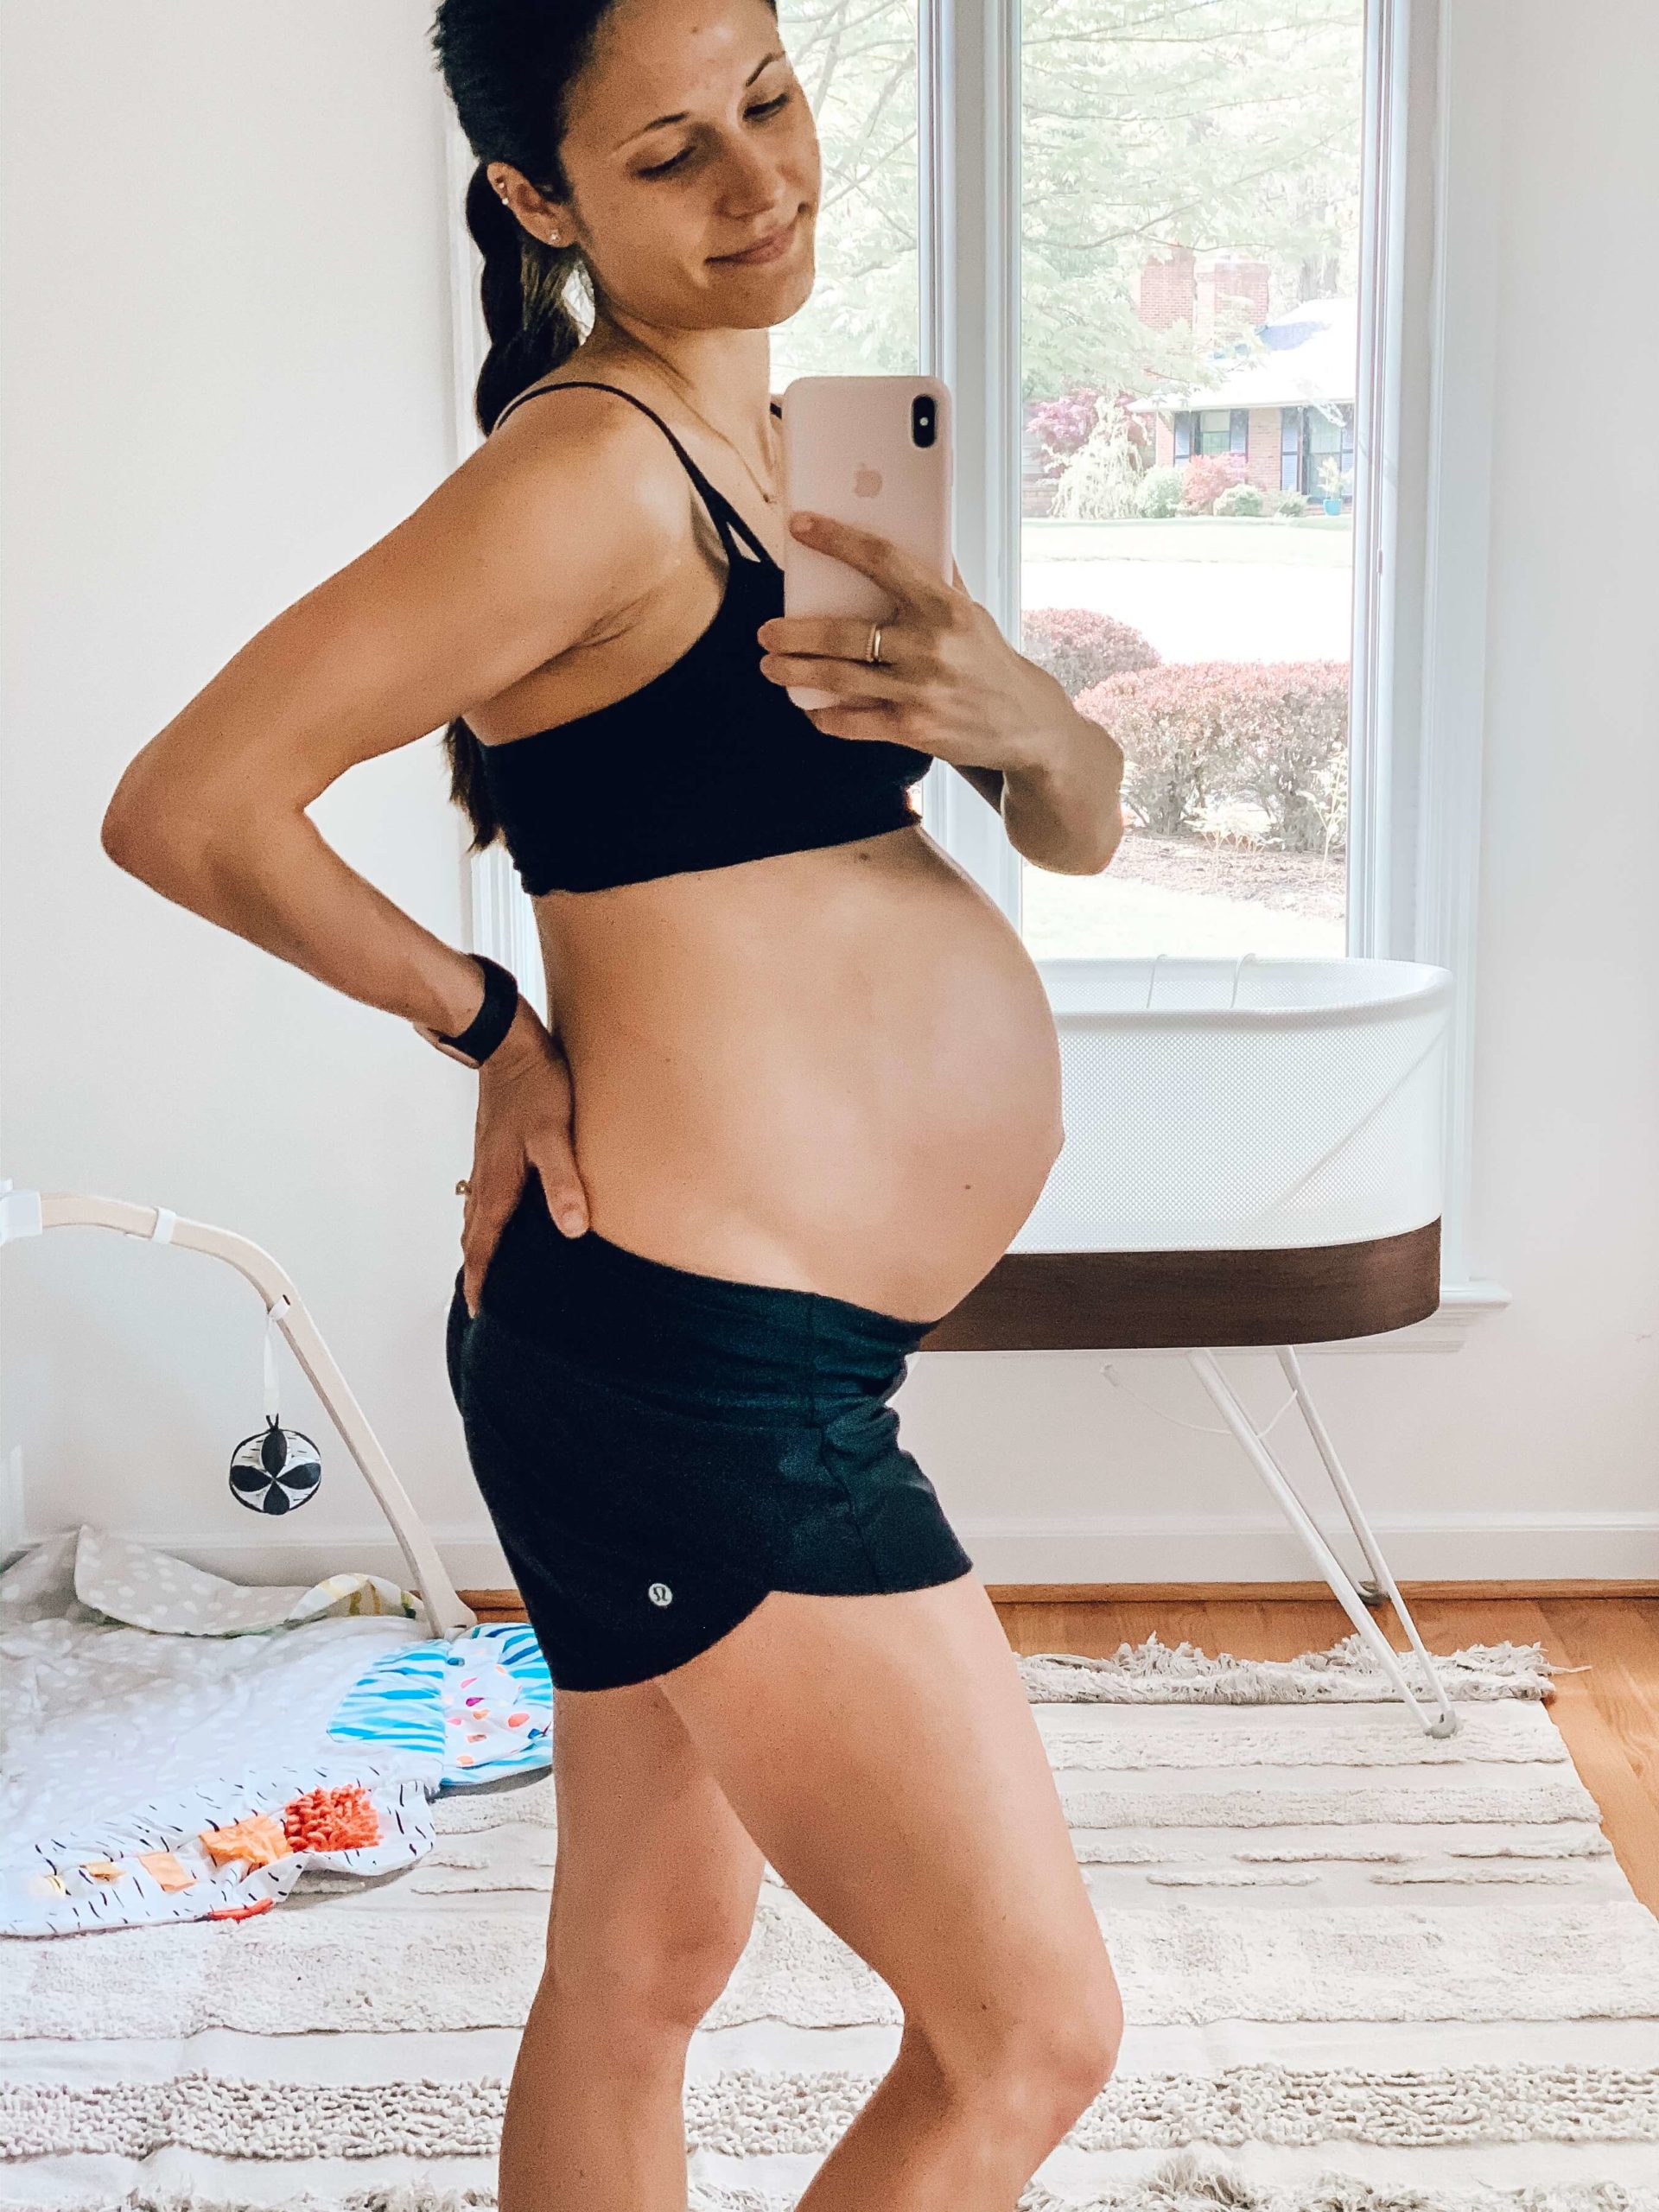 Third trimester pregnancy bump Nourished by Nutrition